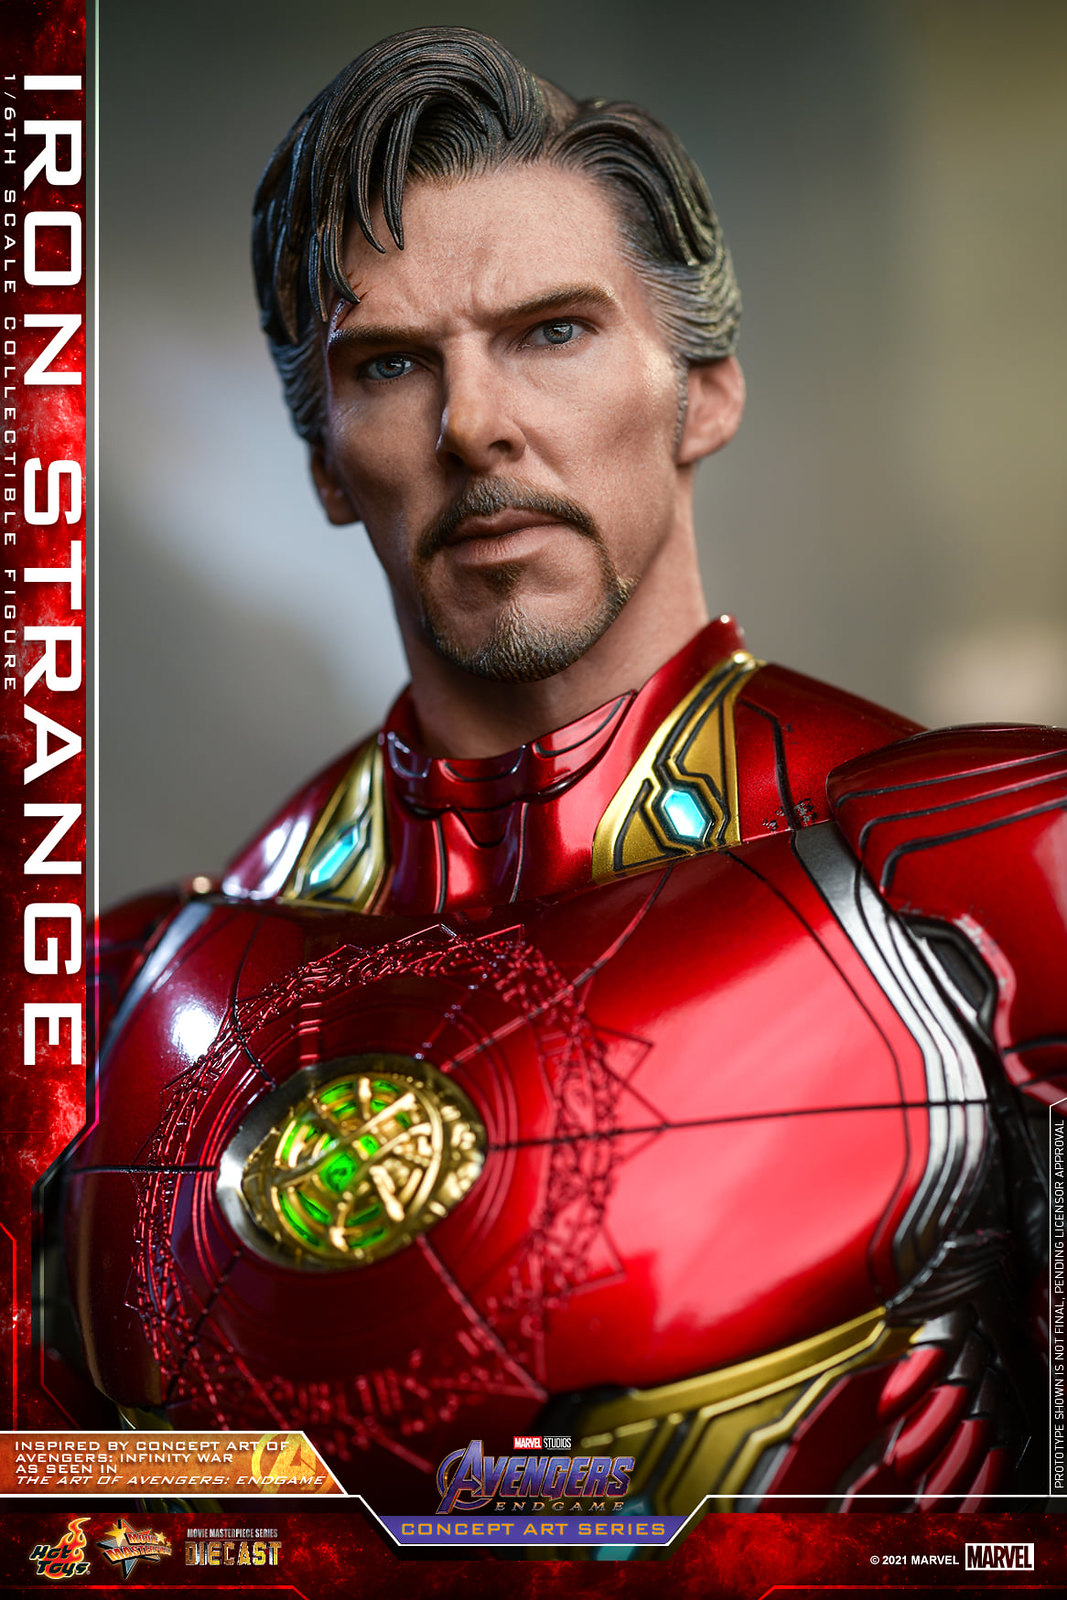 NEW PRODUCT: Hot Toys Avengers: Endgame (Concept Art Series) - 1/6th scale Iron Strange Collectible Figure 51310483442_fe00f1ffa6_h